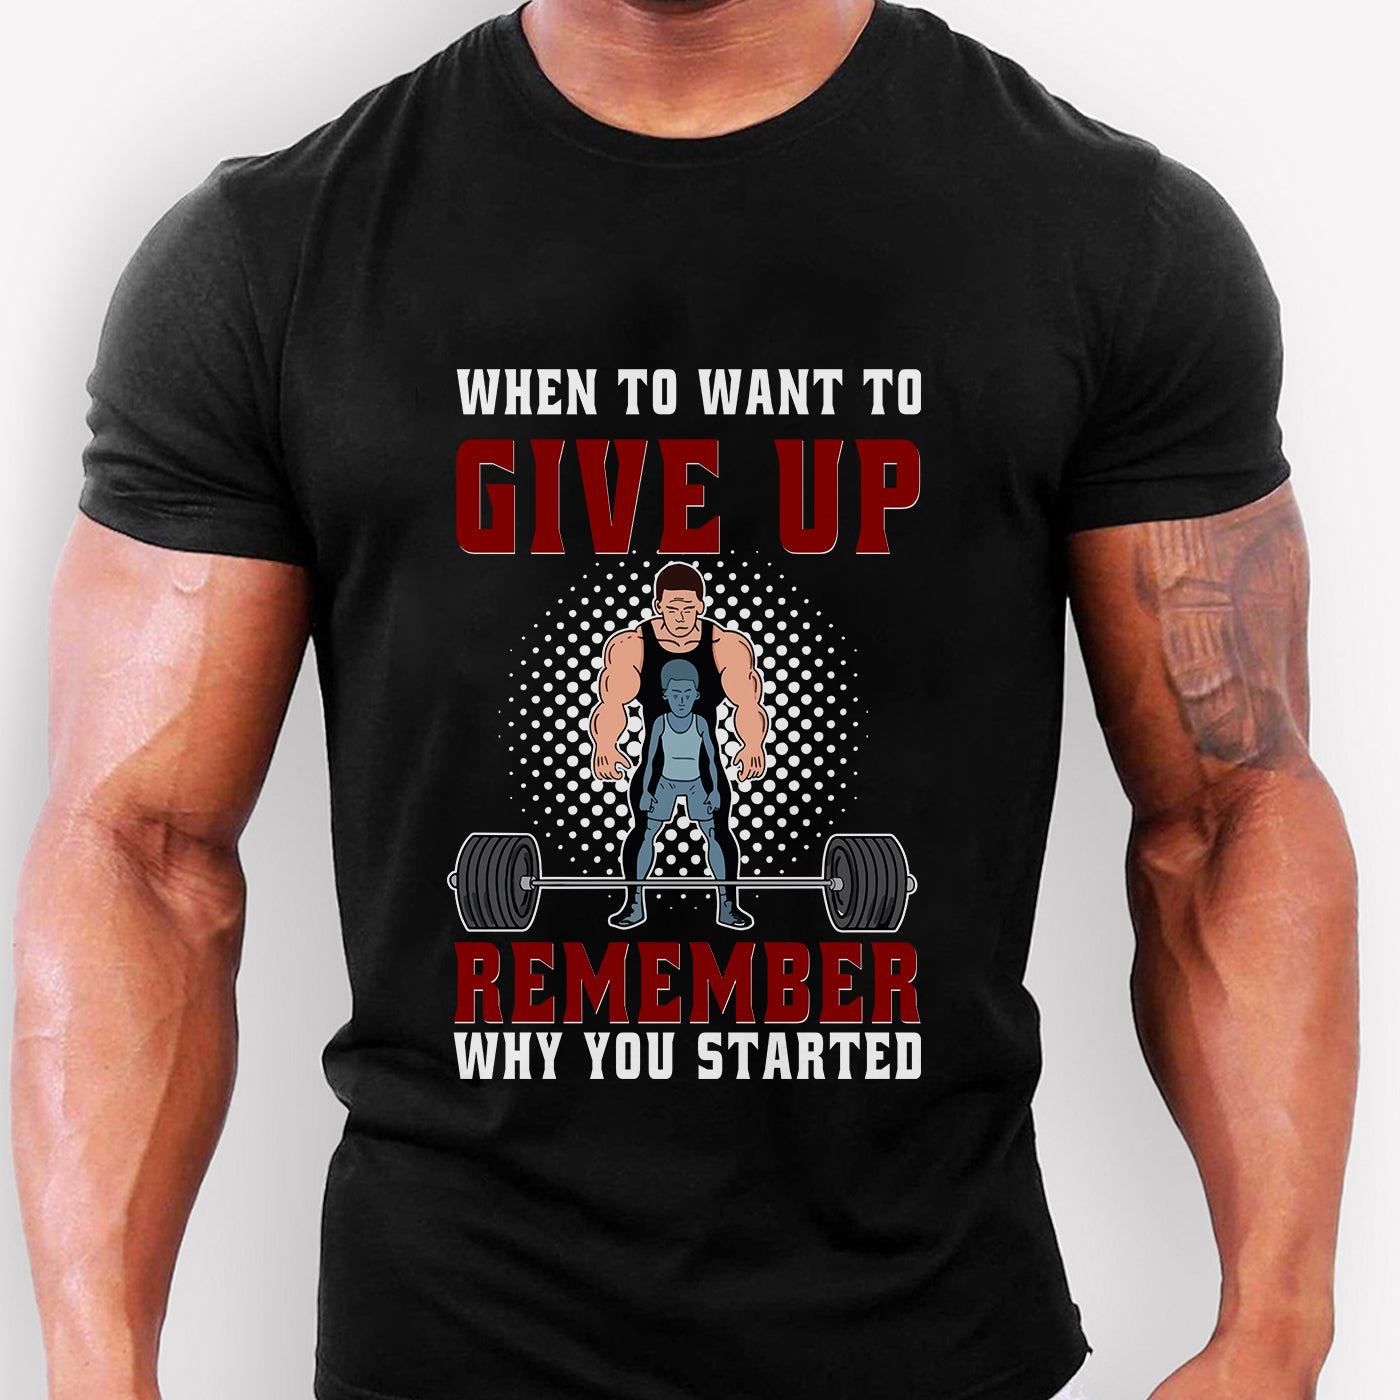 Gym T-shirts Motivation Quotes Weightlifting Remember when you started